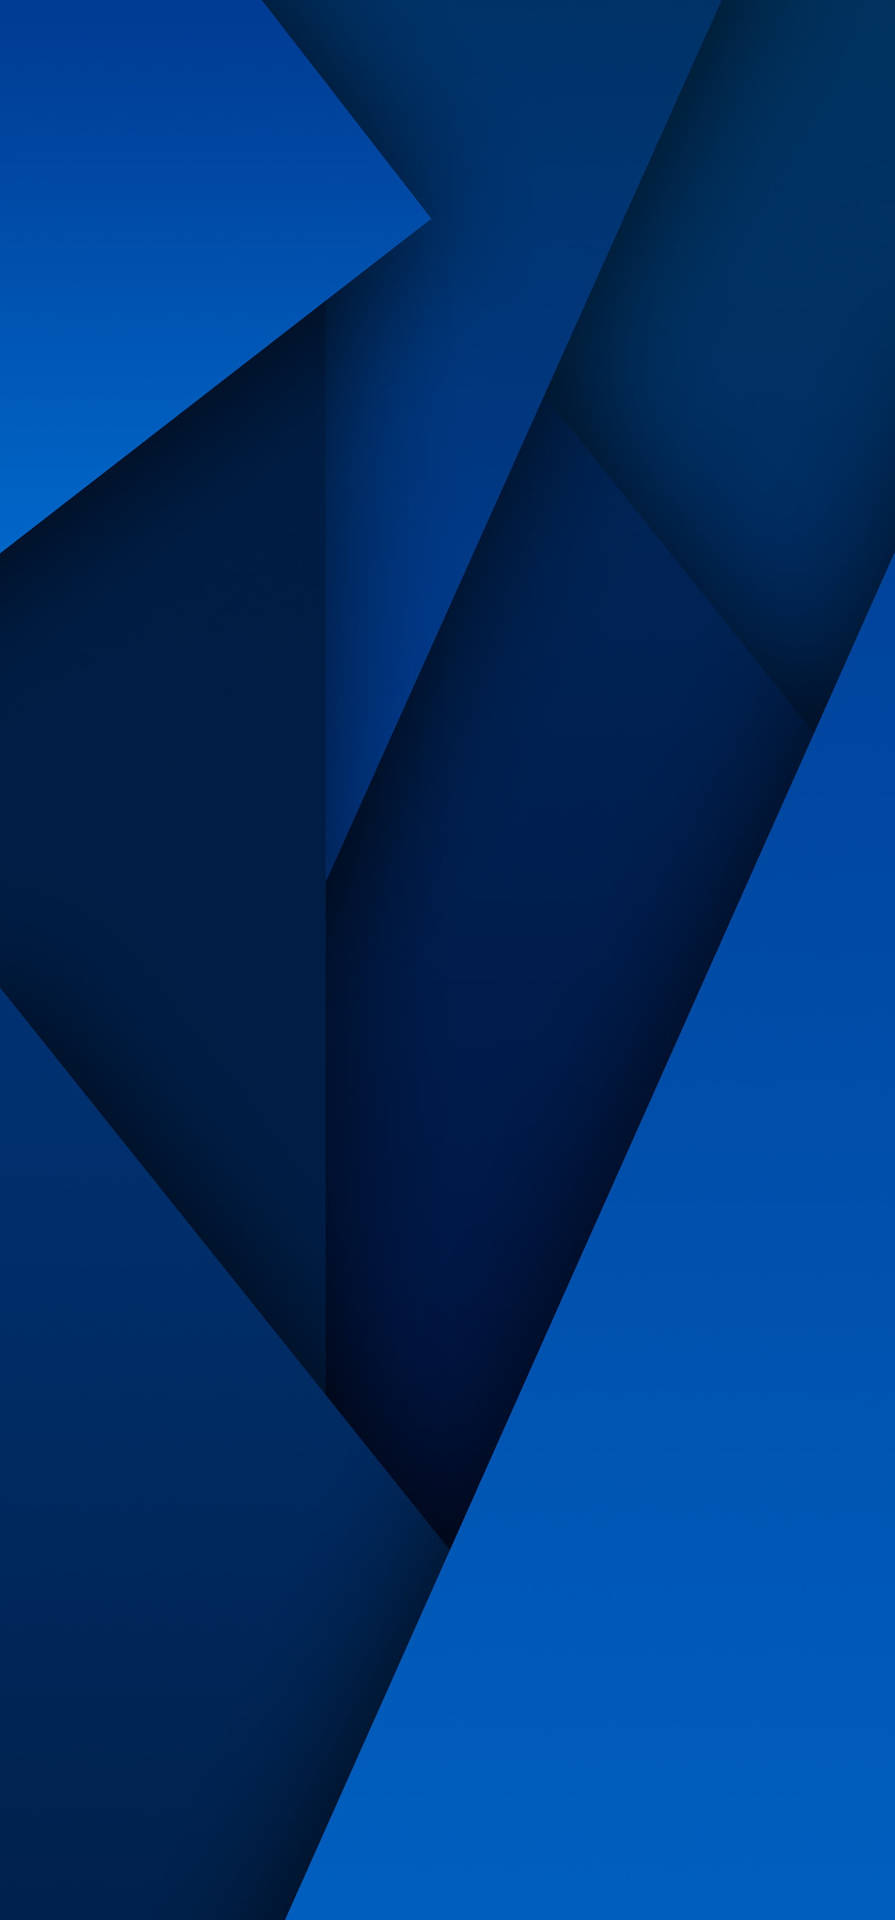 Samsung Galaxy Note 20 Ultra Blue Geometic Patterns Background